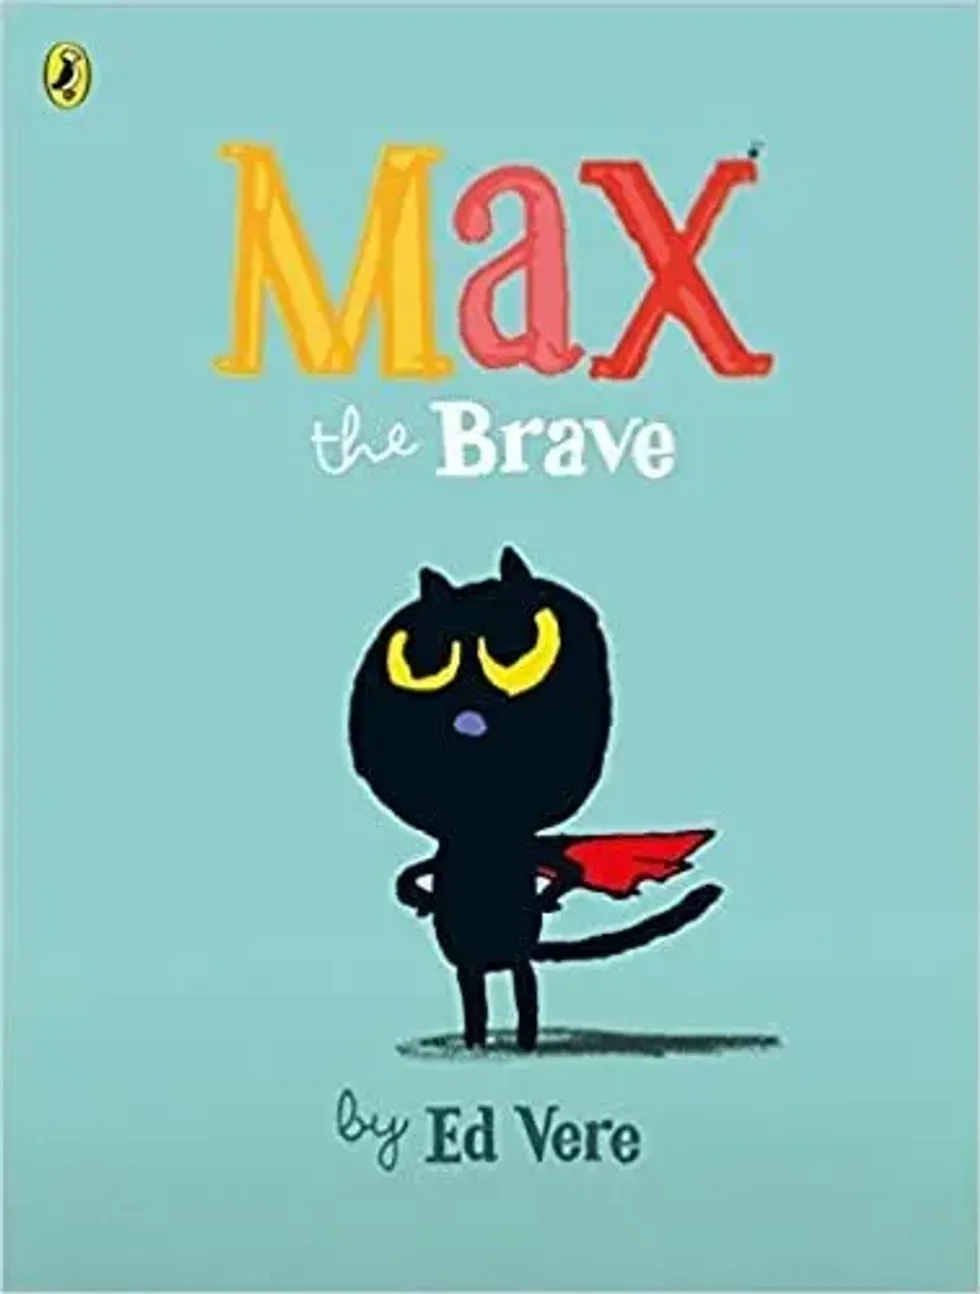 Cover of Max The Brave. A cartoon black cat stands proud wearing a red cape, set against a light blue background.